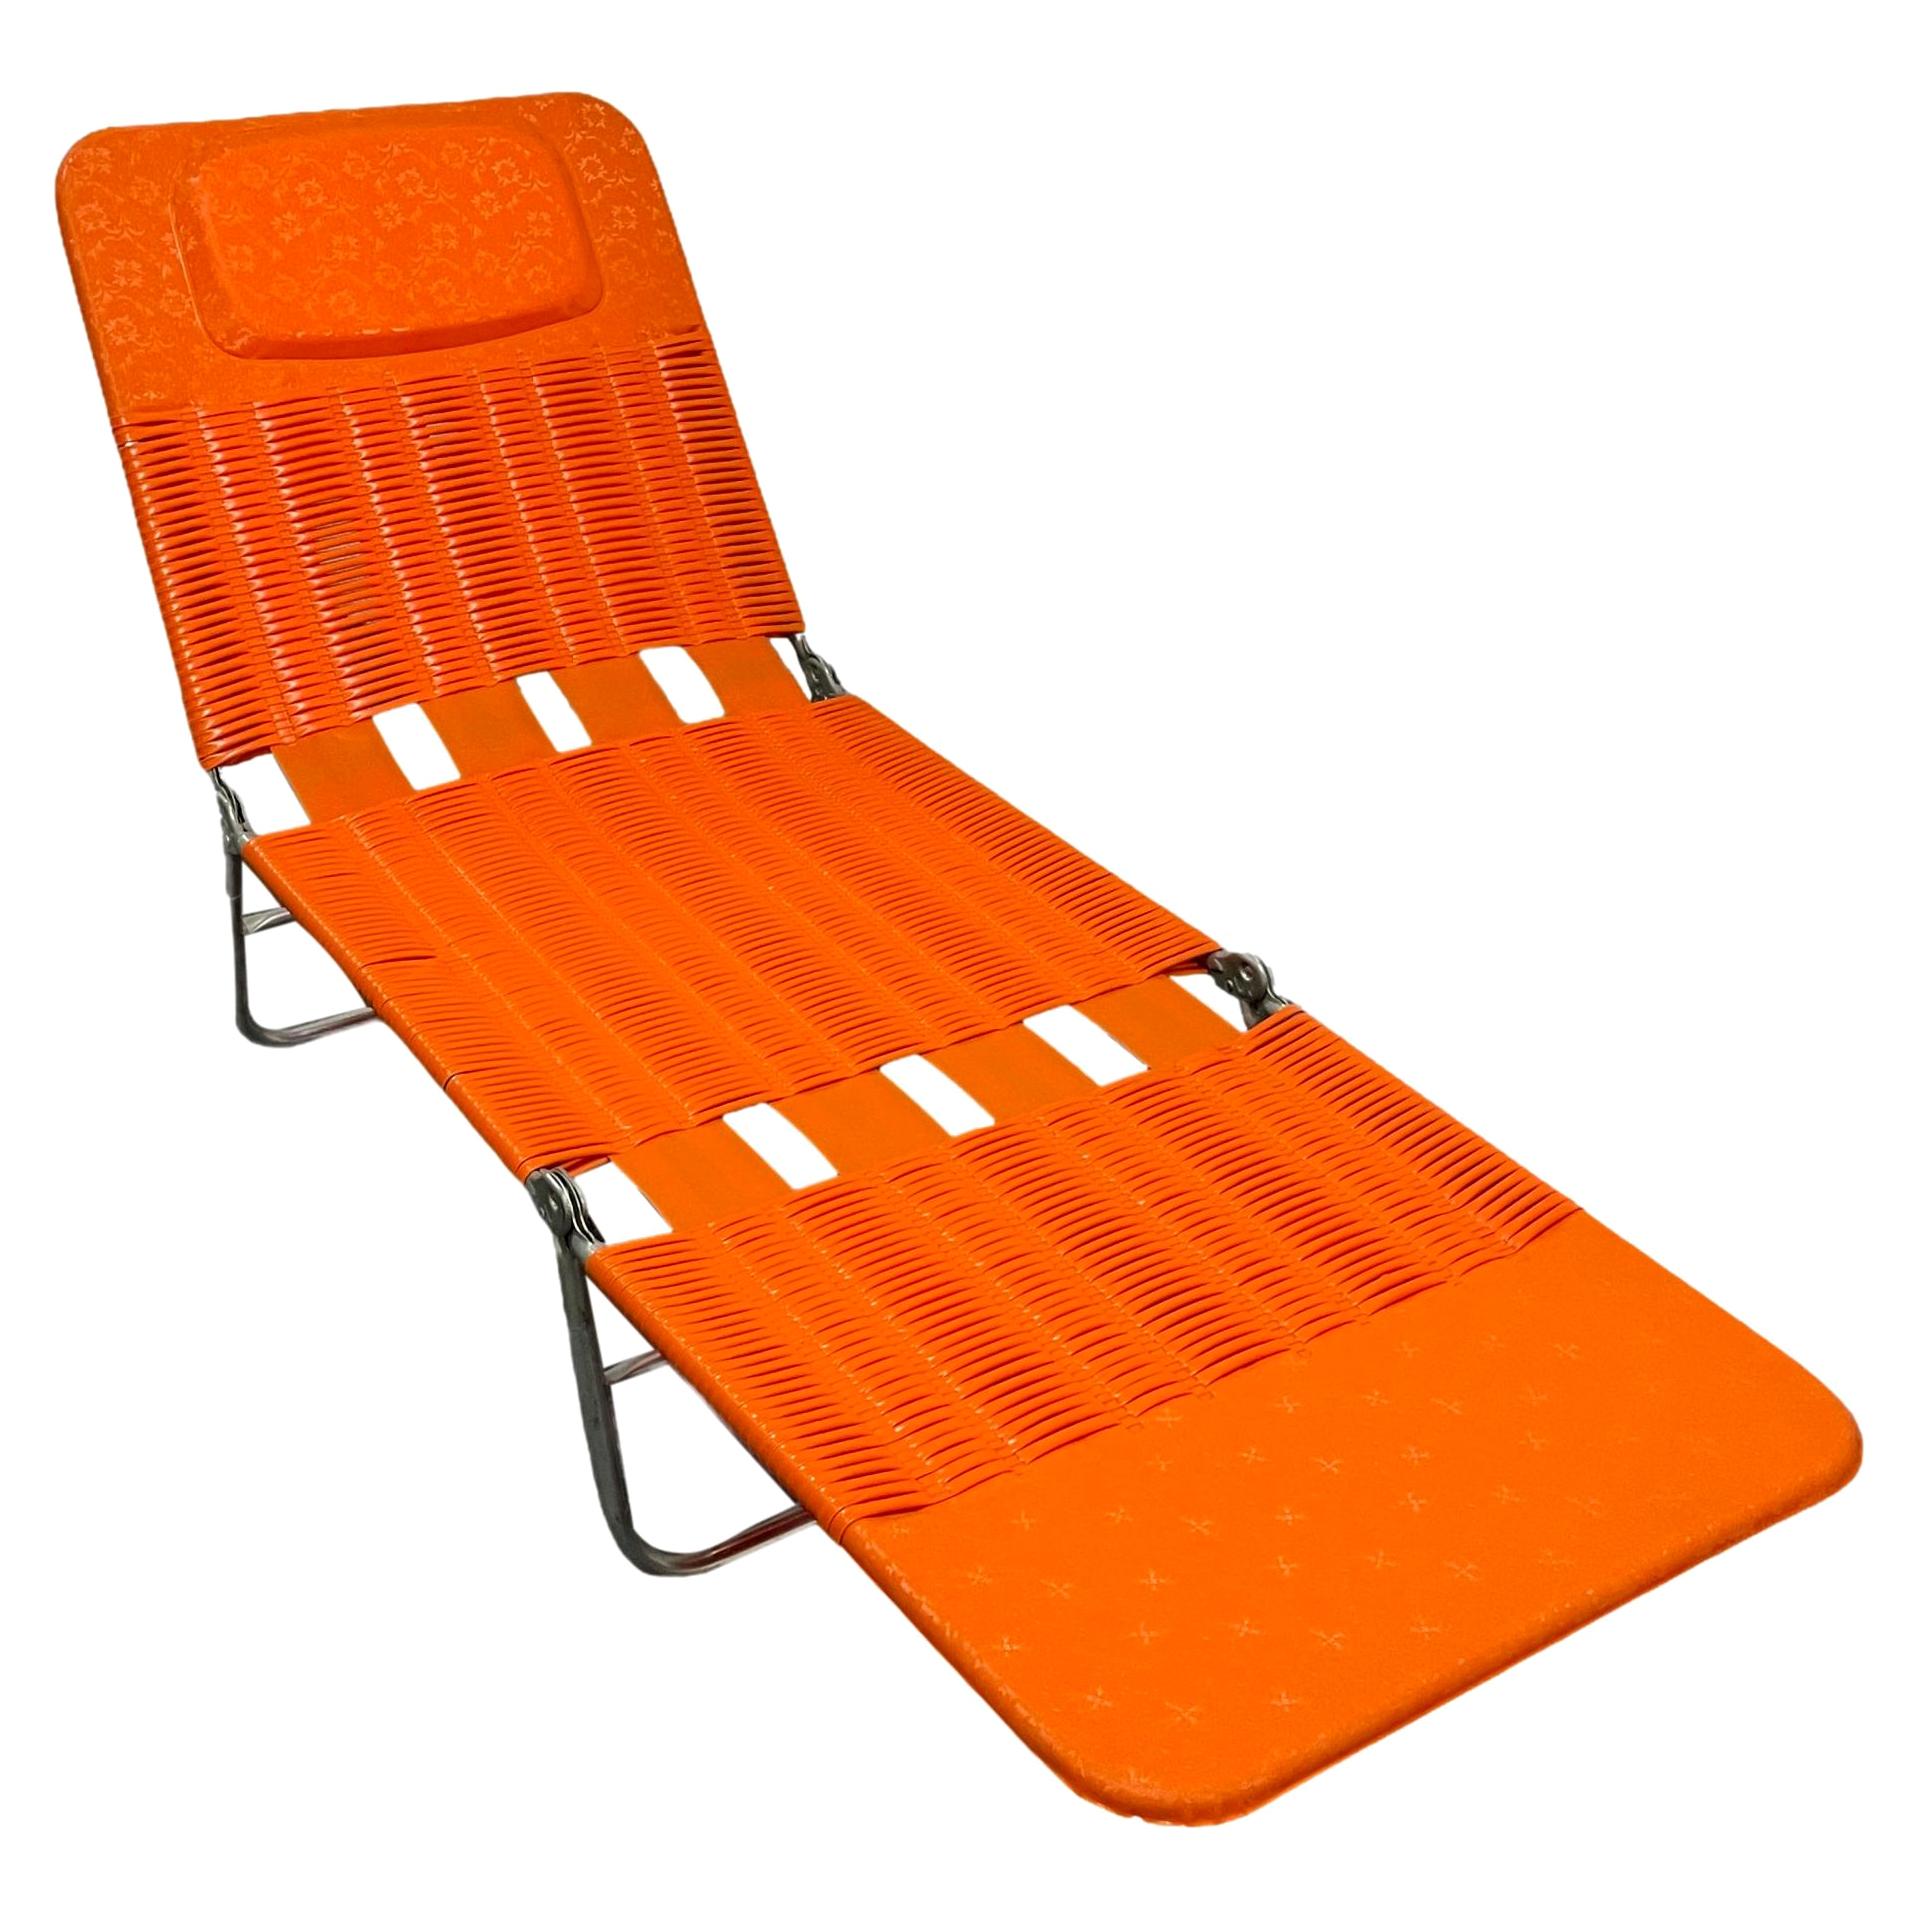 Midcentury Folding Deck Chair, Pool Patio Lounger by Kurz, Germany, 1970s